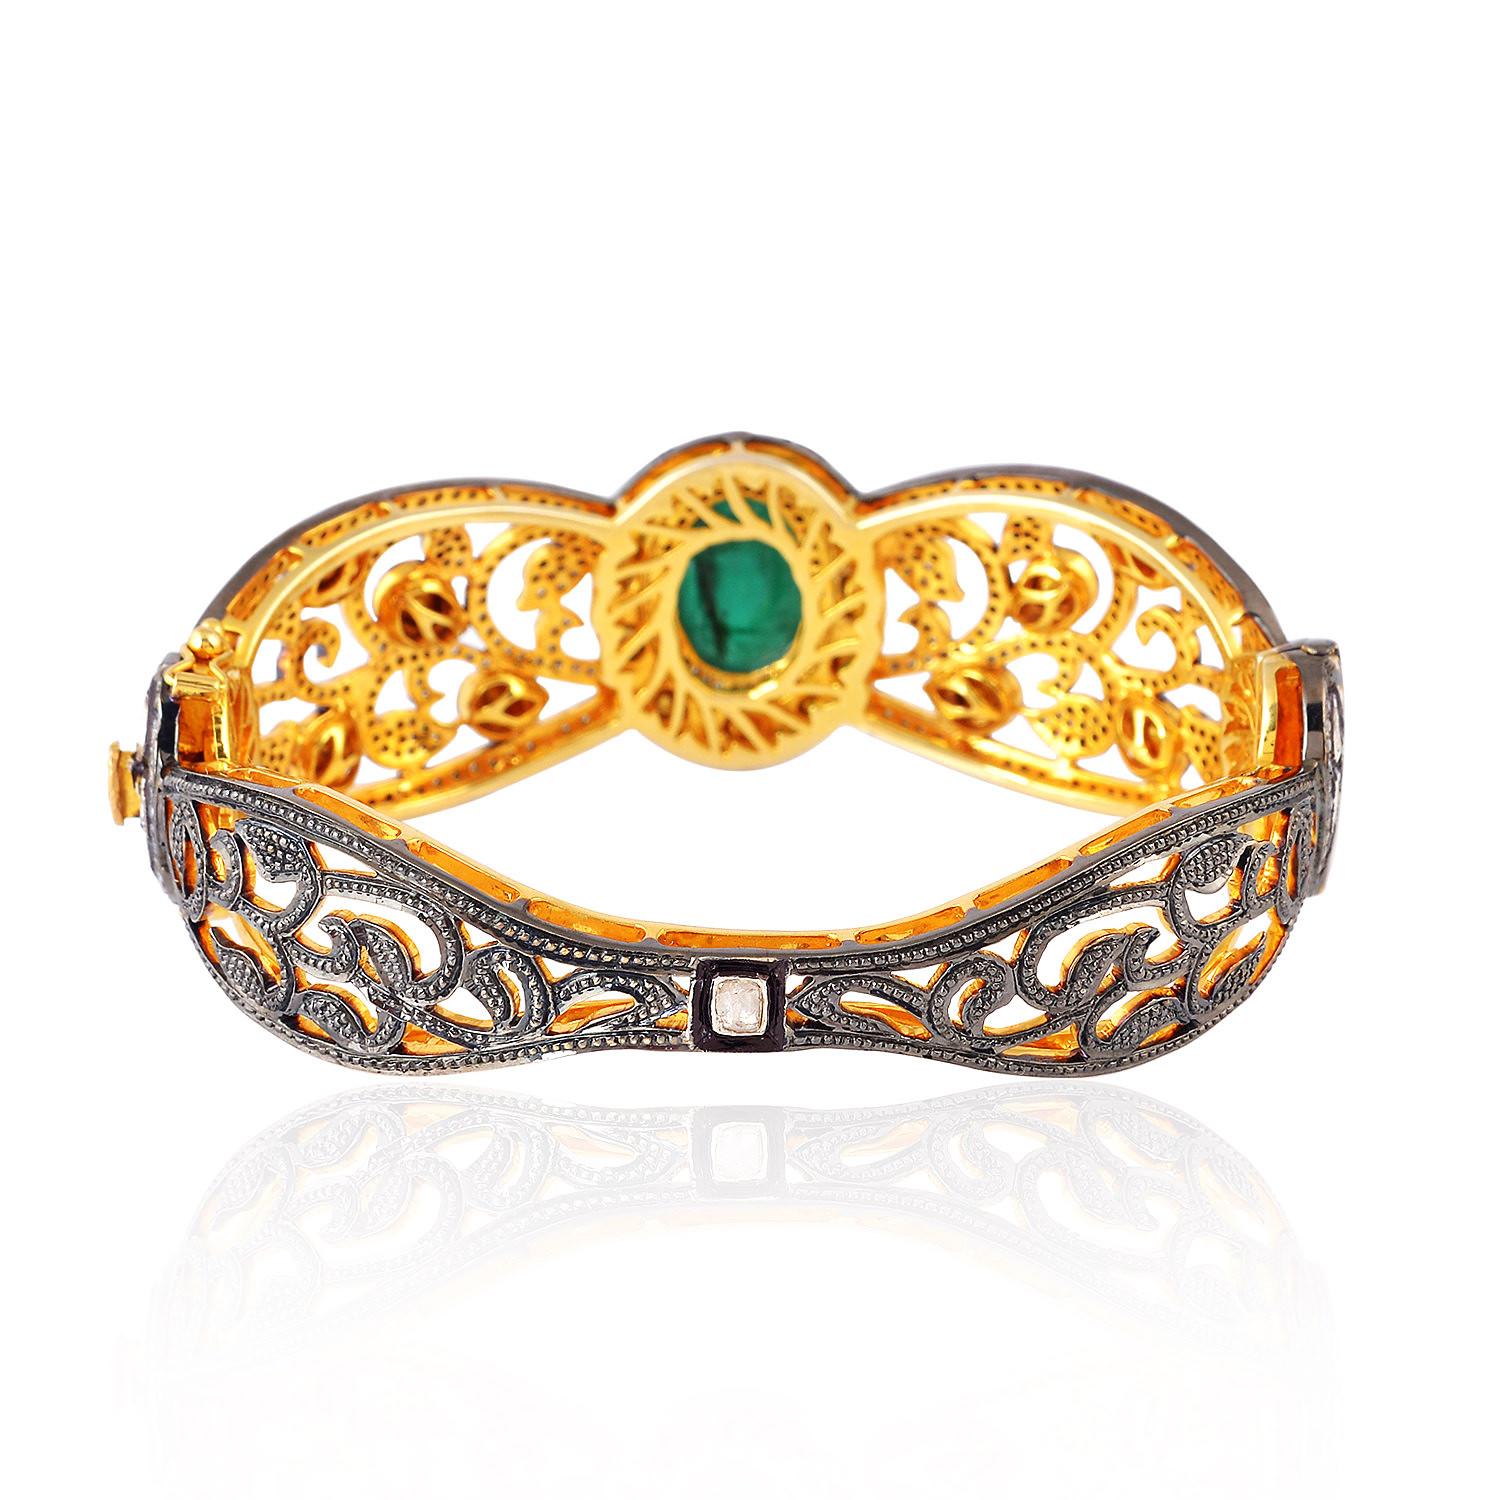 A stunning bracelet handmade in 18K gold & sterling silver with blackened finish. It is set in 5.09 carats emerald & 5.99 carats rosecut diamonds. Clasp Closure
Instock

FOLLOW  MEGHNA JEWELS storefront to view the latest collection & exclusive